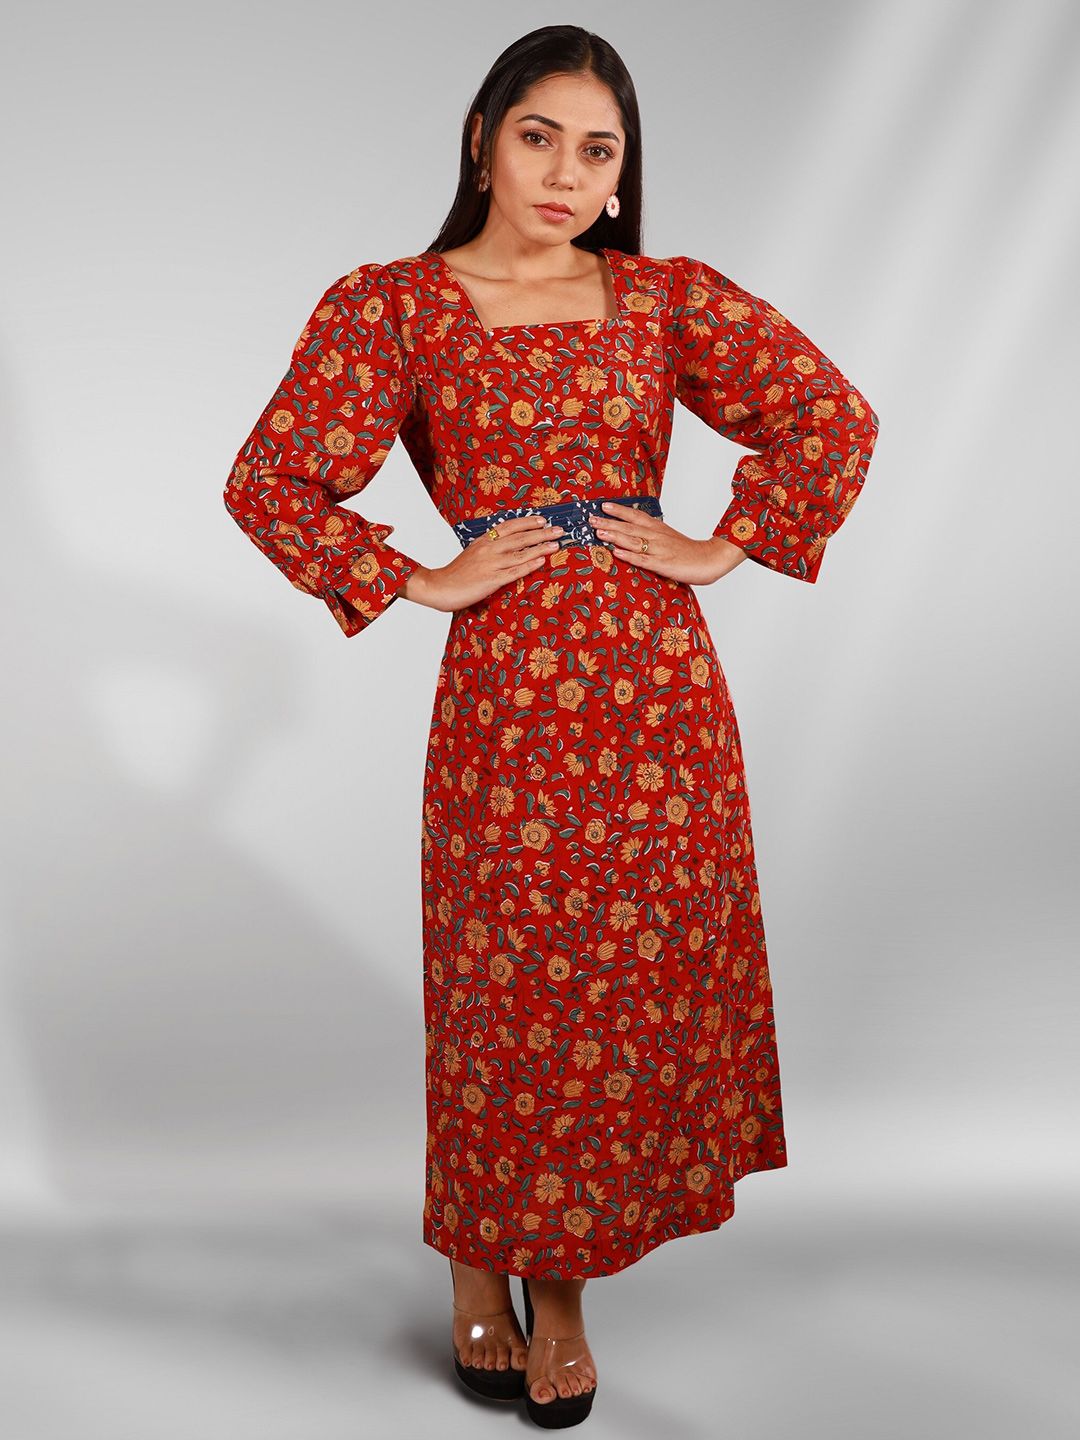 Orbbaan Red & Yellow Floral Maxi Dress Price in India